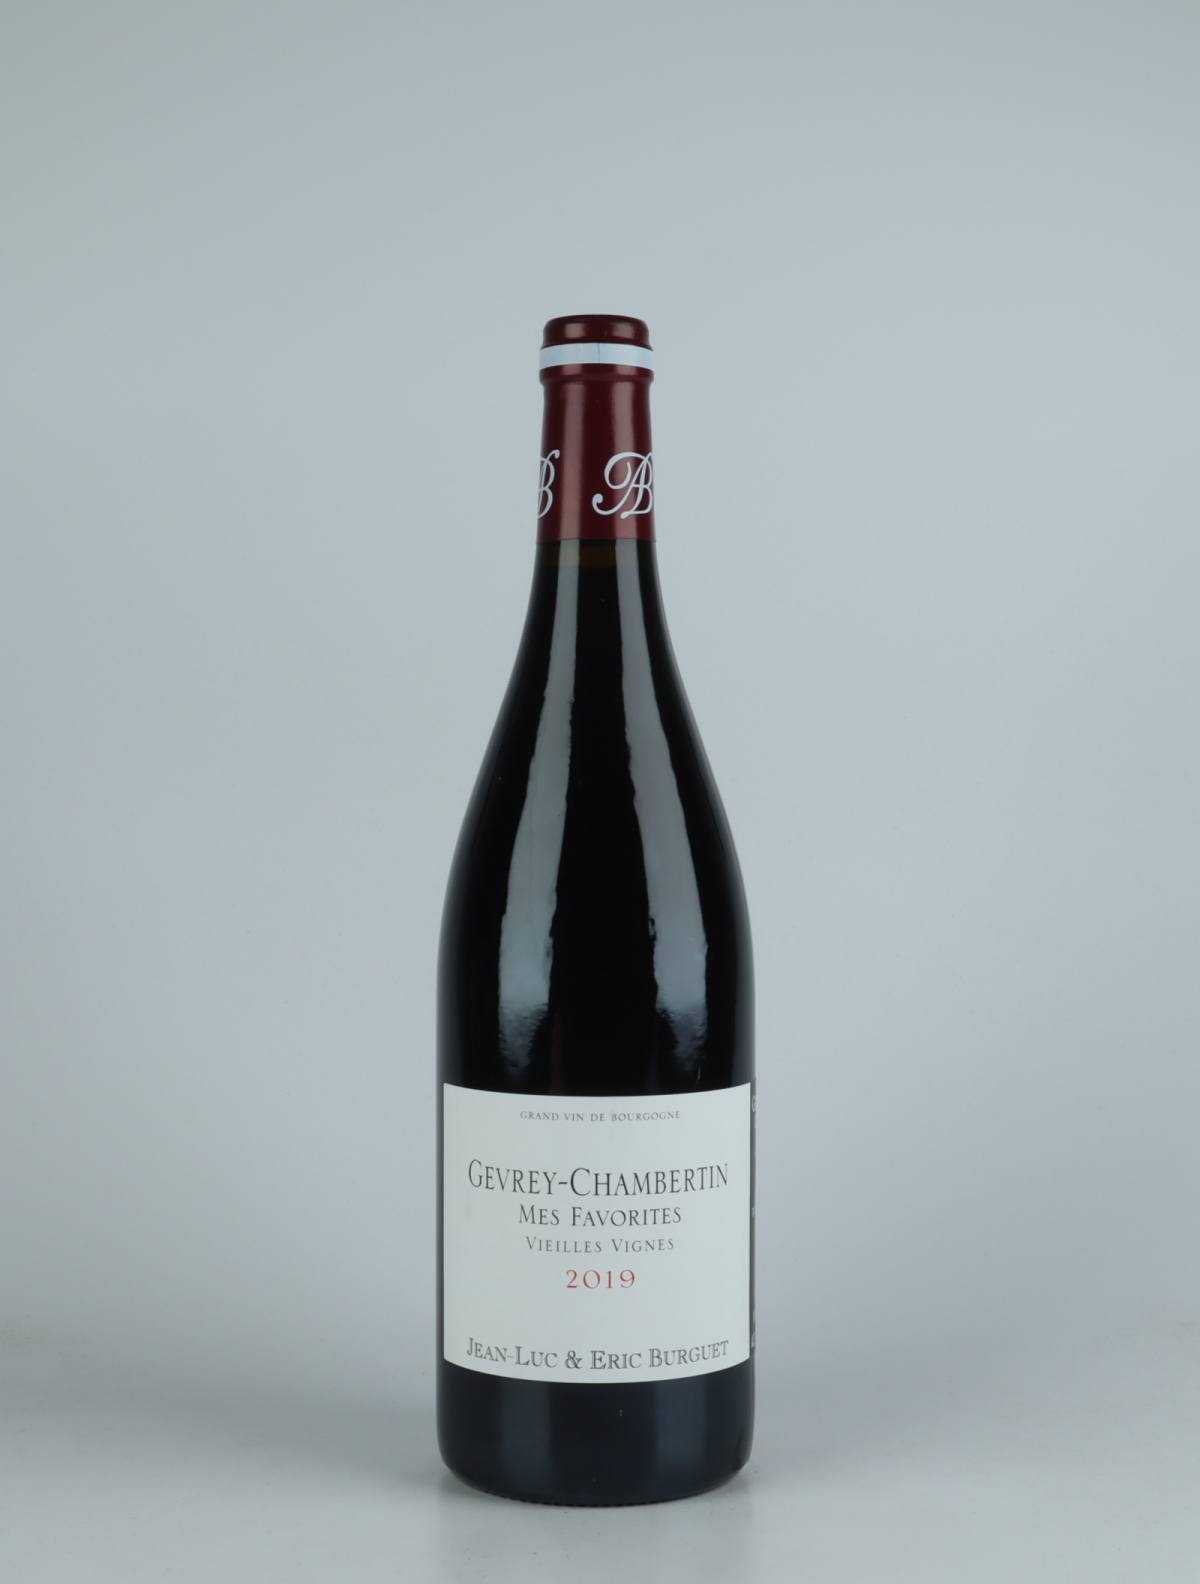 A bottle 2019 Gevrey-Chambertin - Mes Favorites Red wine from Jean-Luc & Eric Burguet, Burgundy in France